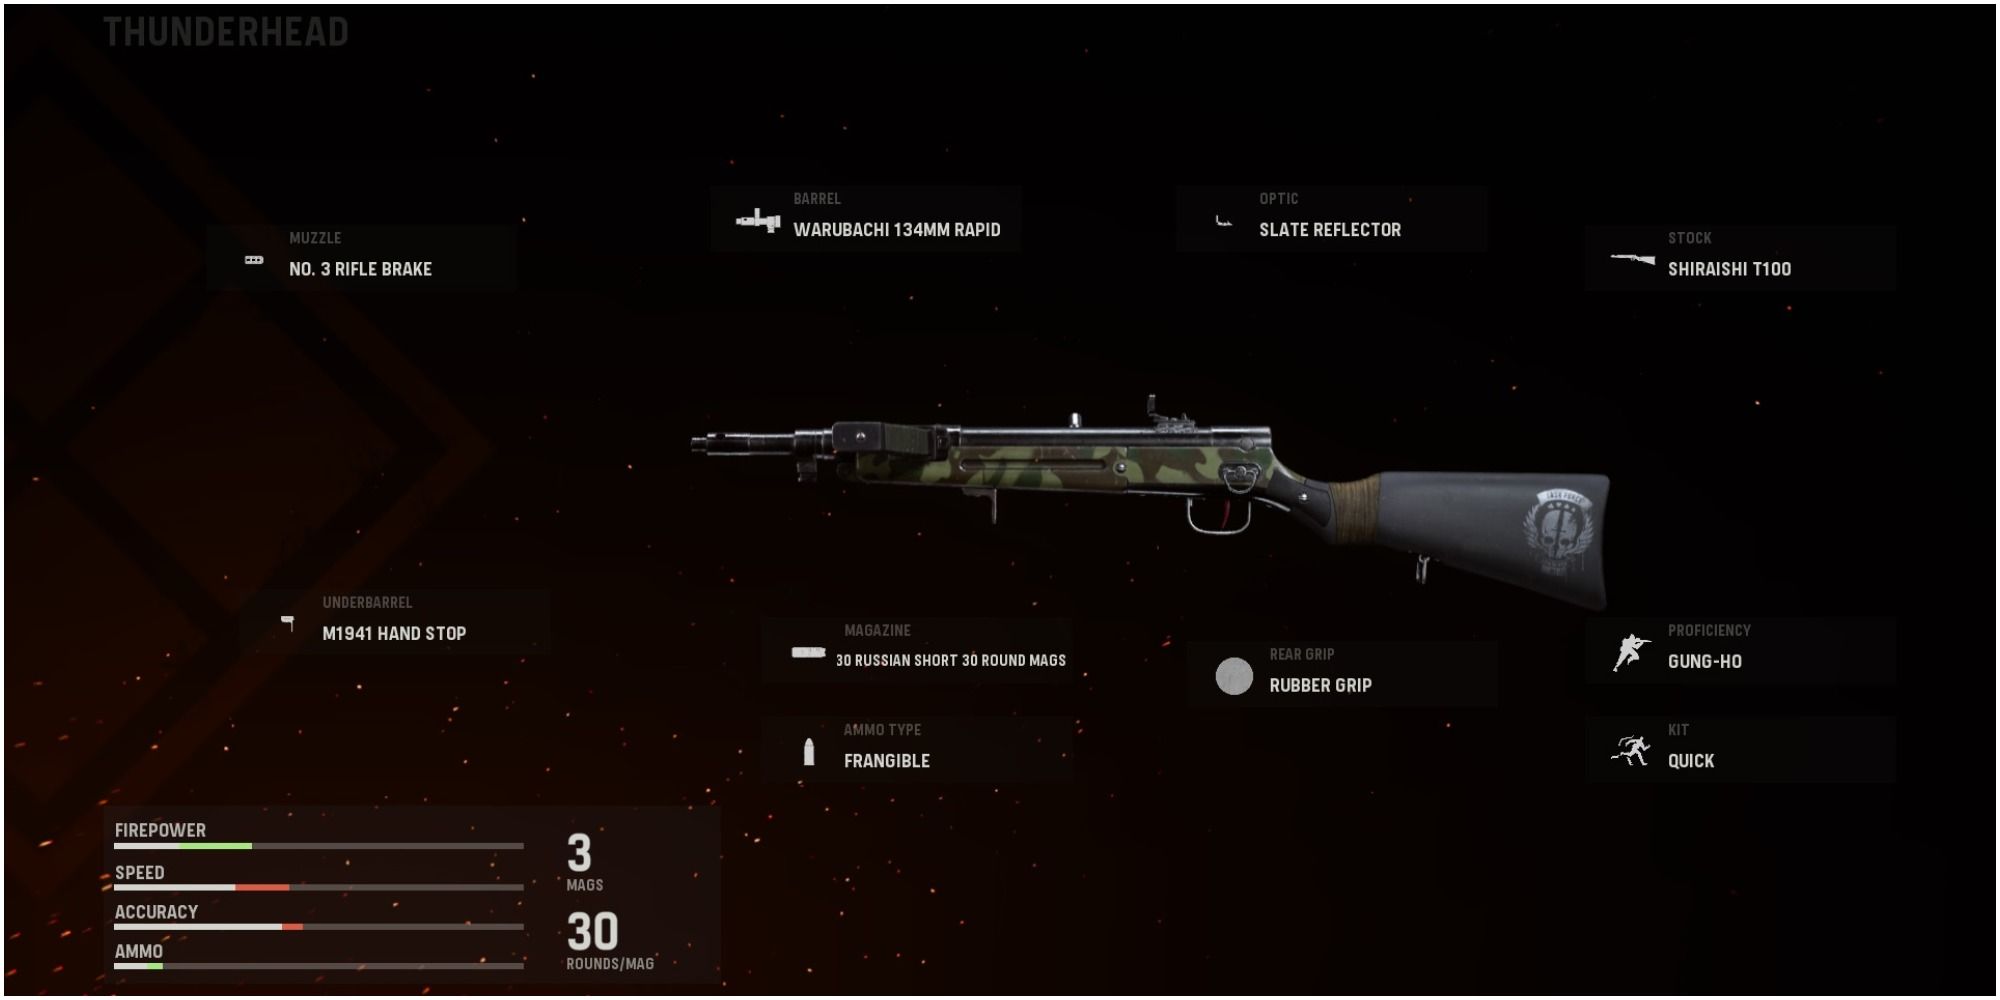 Call Of Duty Vanguard Viewing The Weapon Details Of The Thunderhead